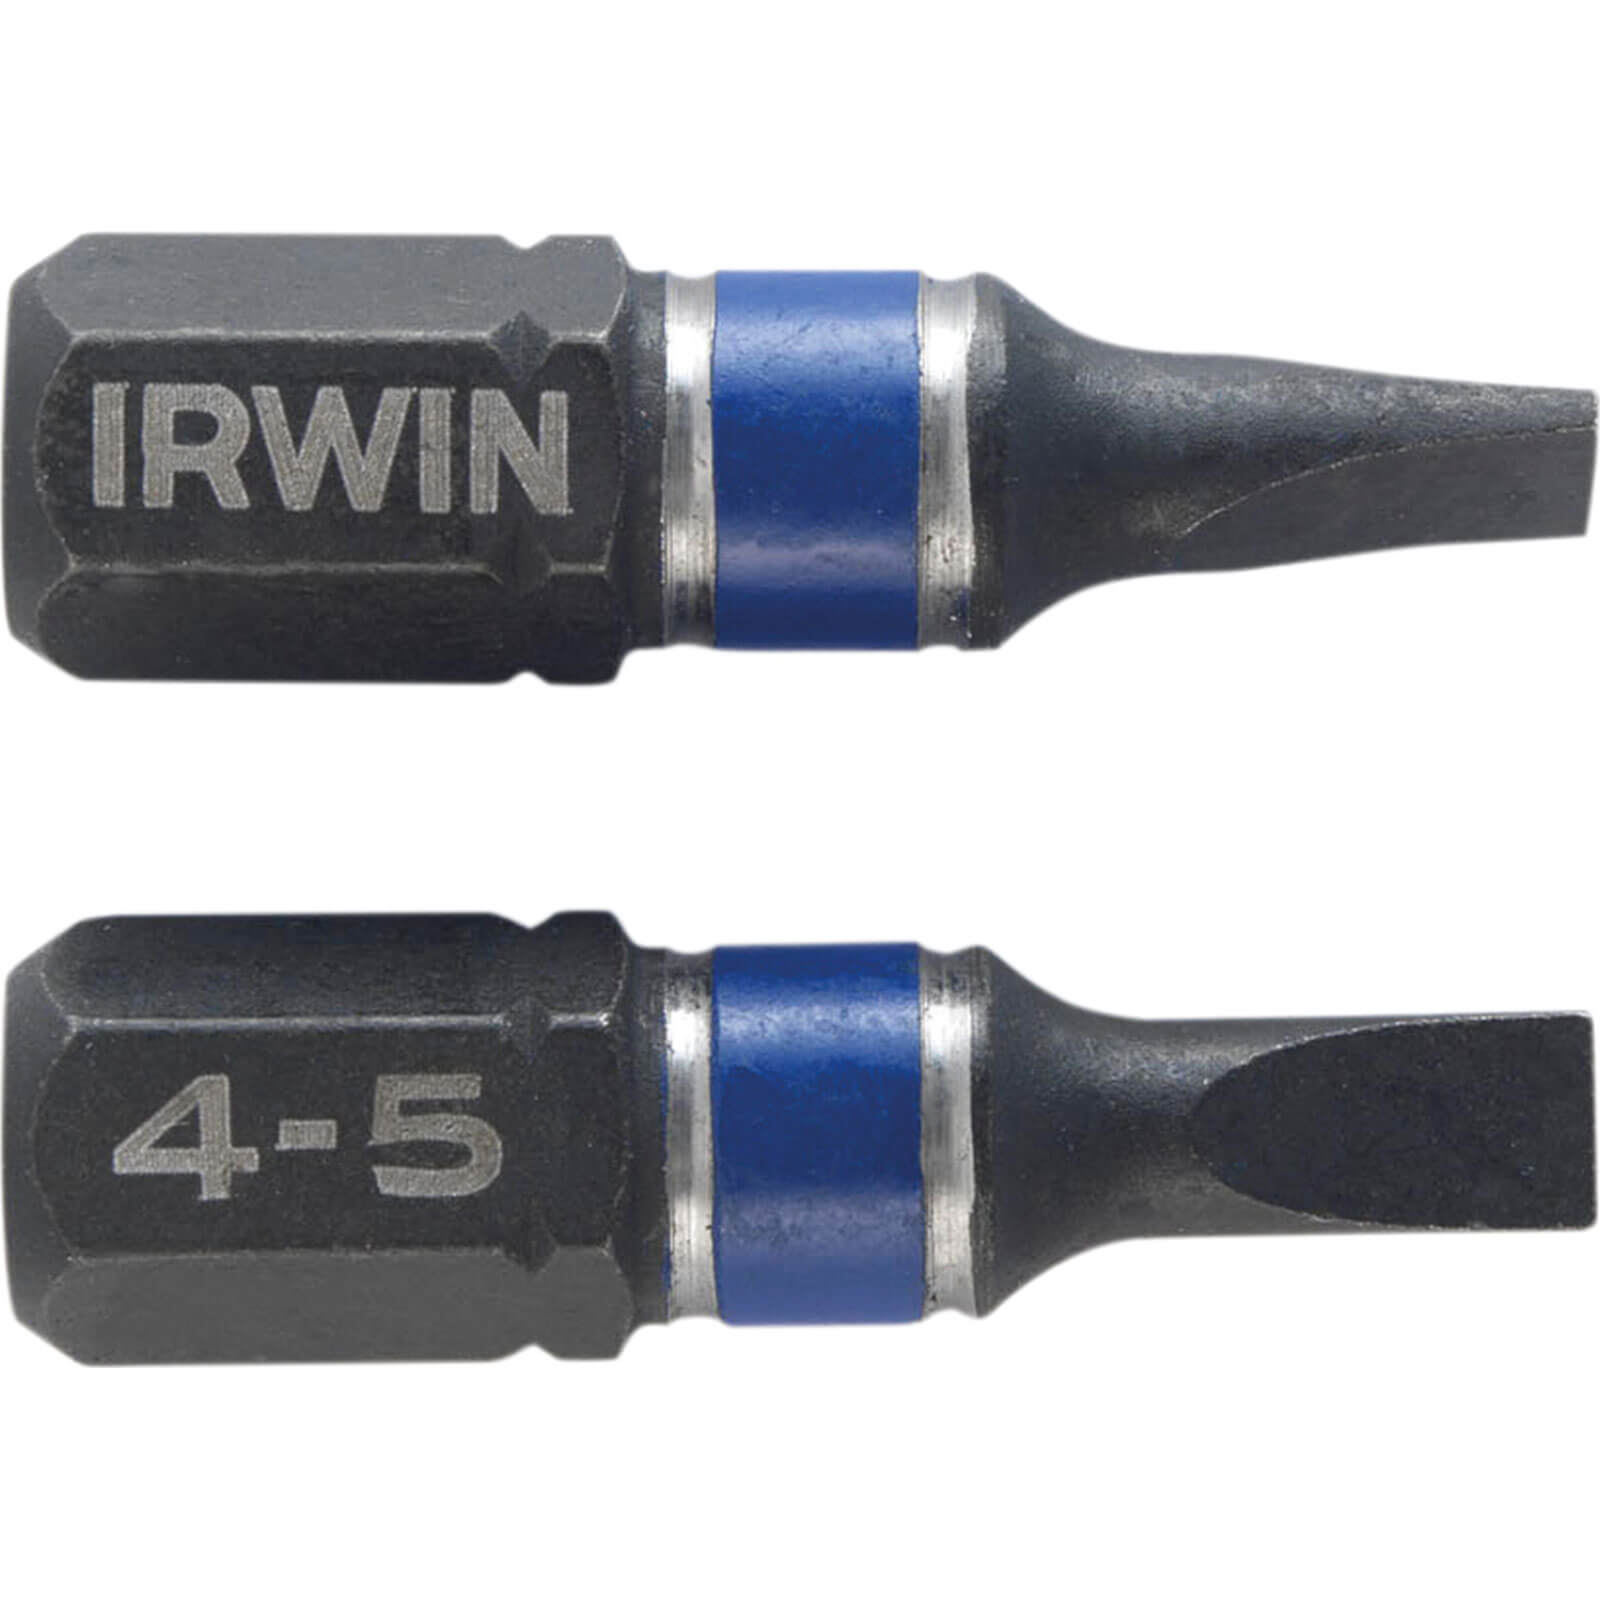 Photo of Irwin Impact Slotted Screwdriver Bits 4.5mm 25mm Pack Of 2